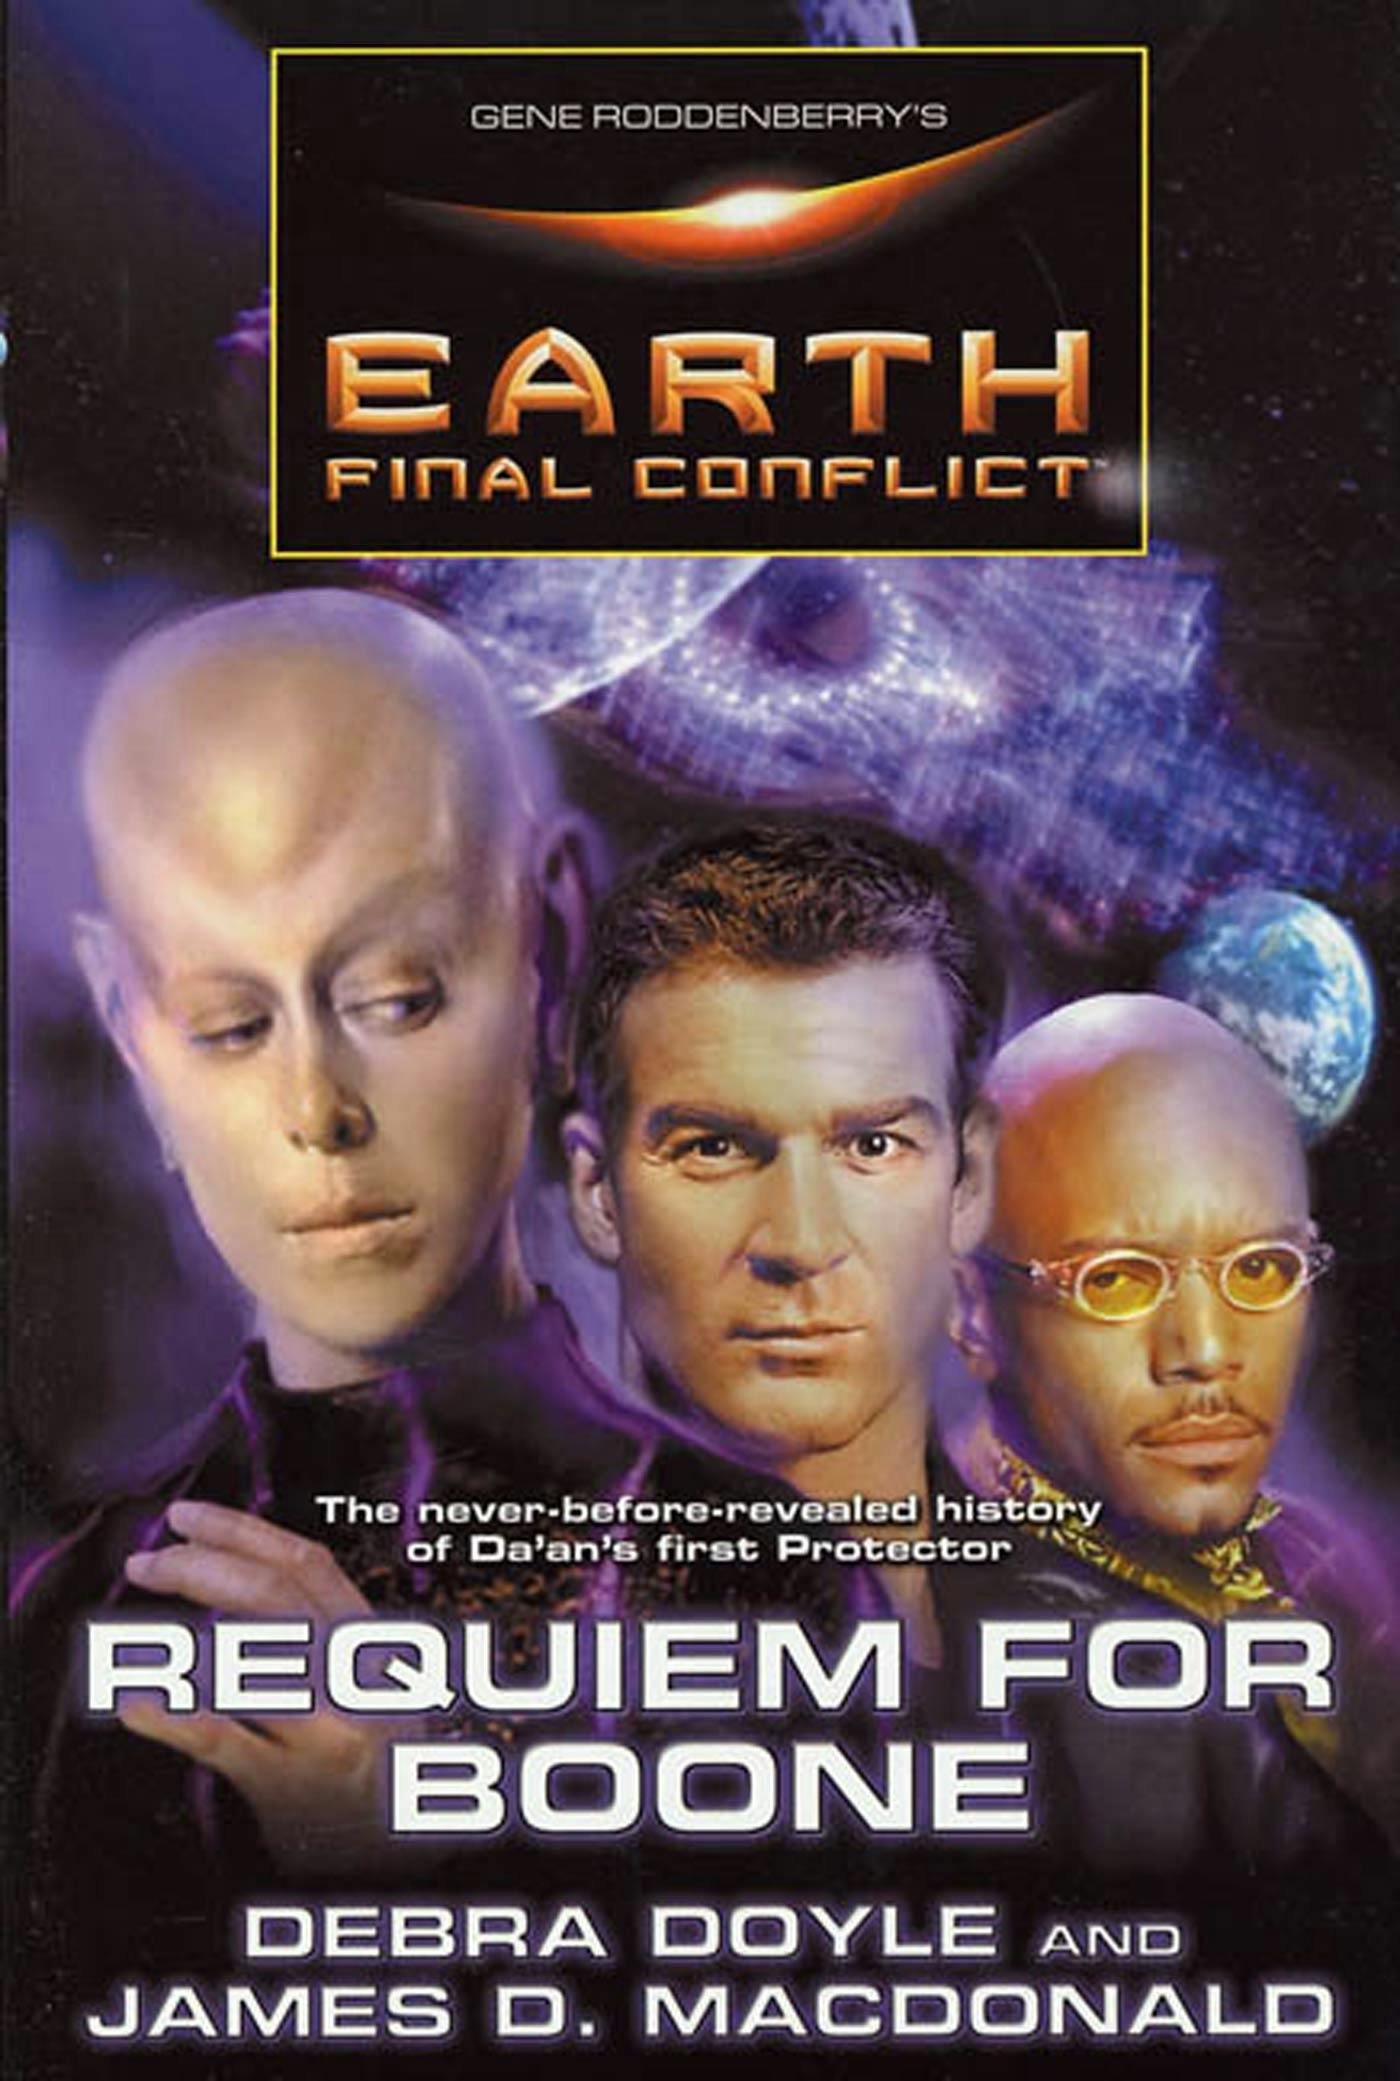 Cover for the book titled as: Gene Roddenberry's Earth: Final Conflict--Requiem For Boone